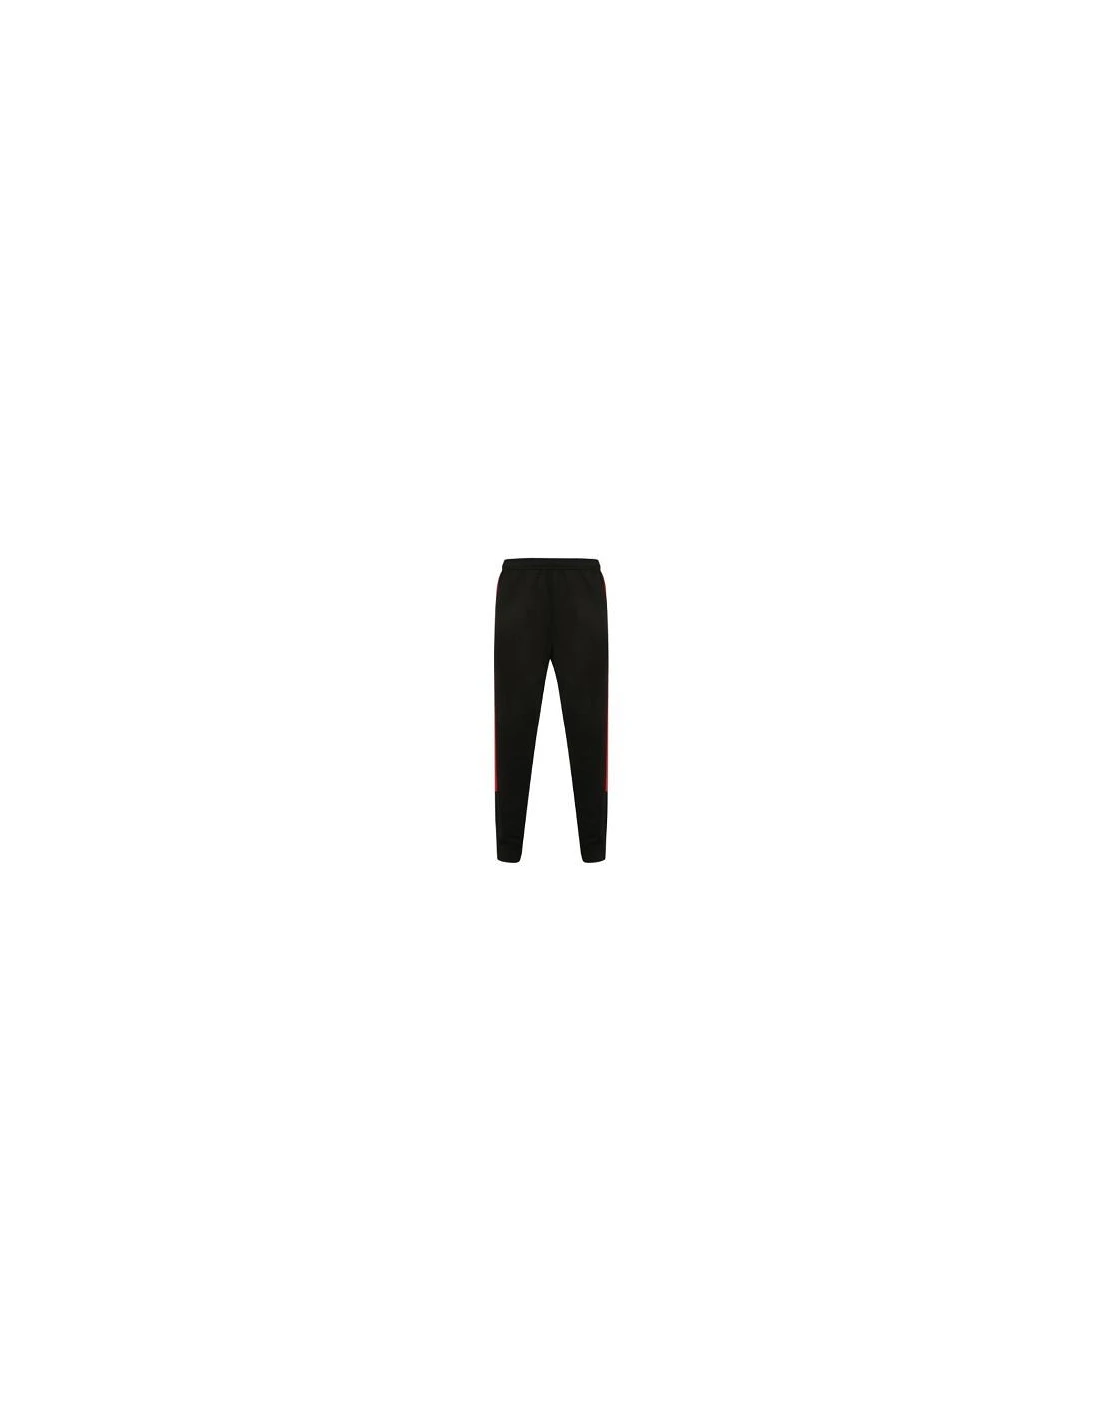 LV881 ADULTS' KNITTED TRACKSUIT PANTS – Finden + Hales